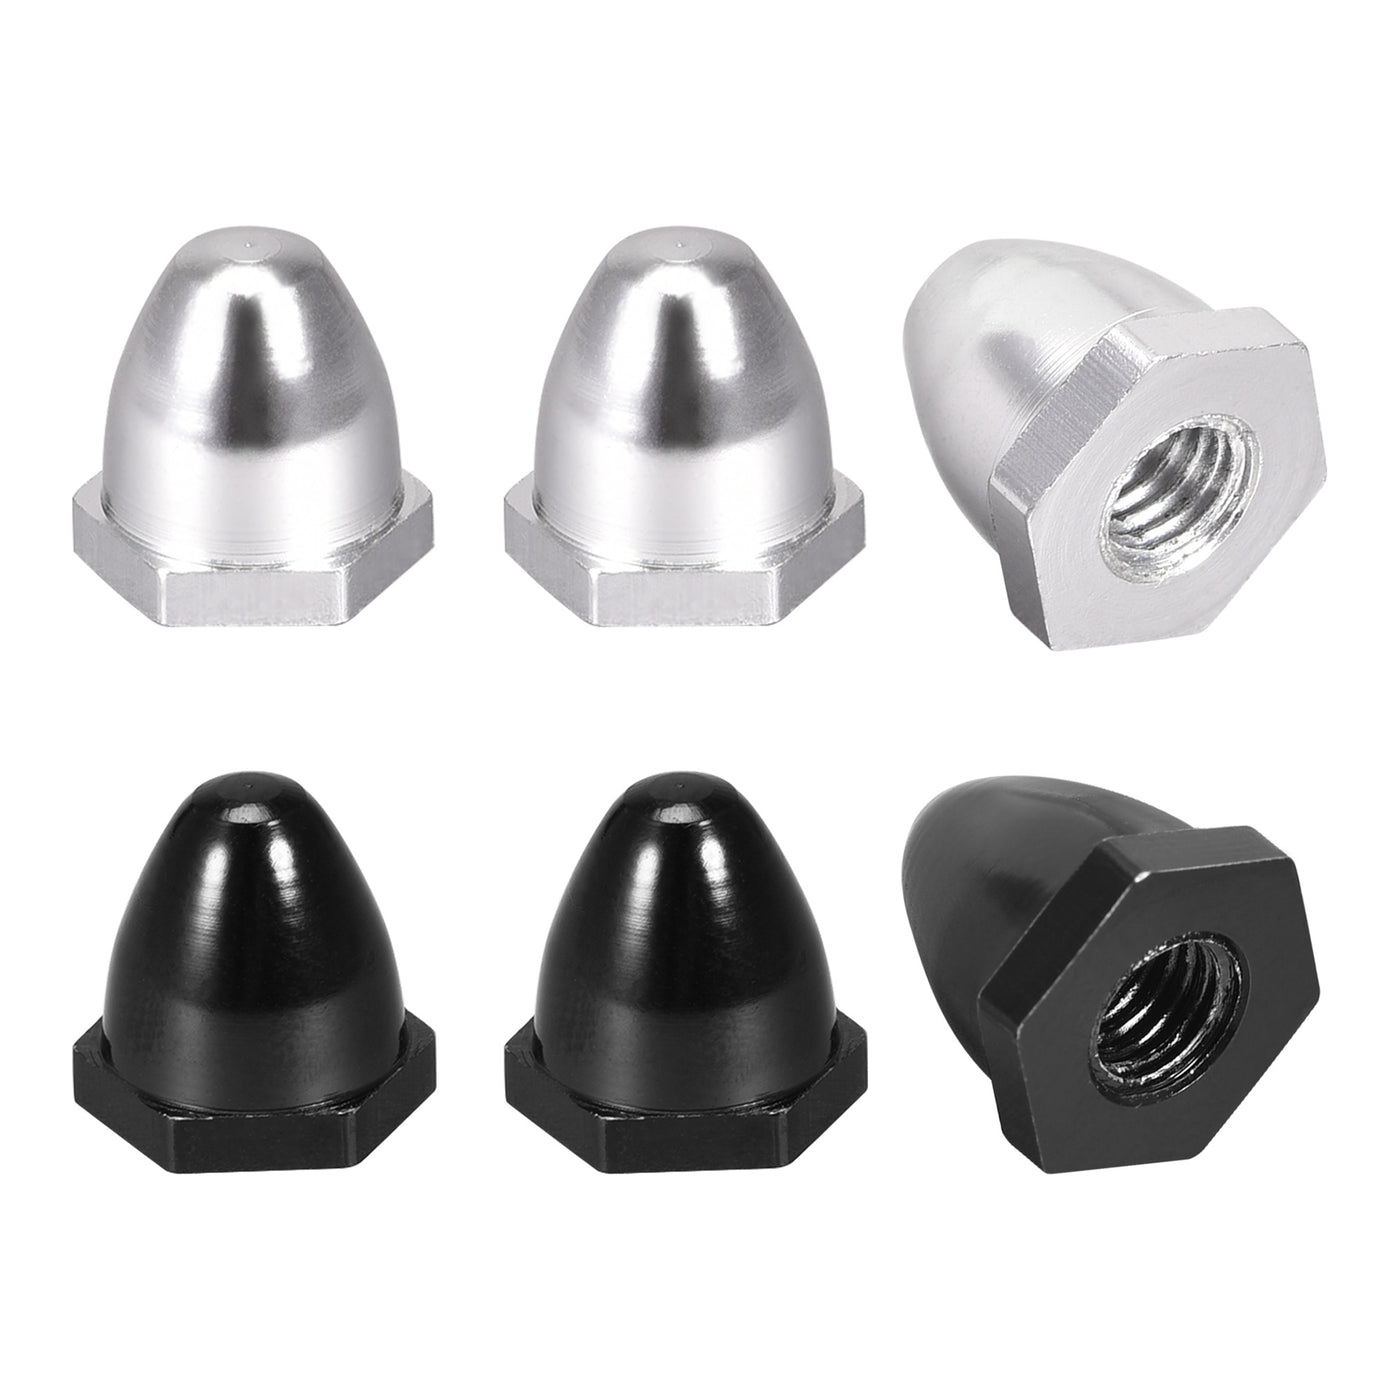 uxcell Uxcell 6pcs Propeller Nut Prop Adapter M5 /C for 1806 2204 2205 2206 2208 Motor Part